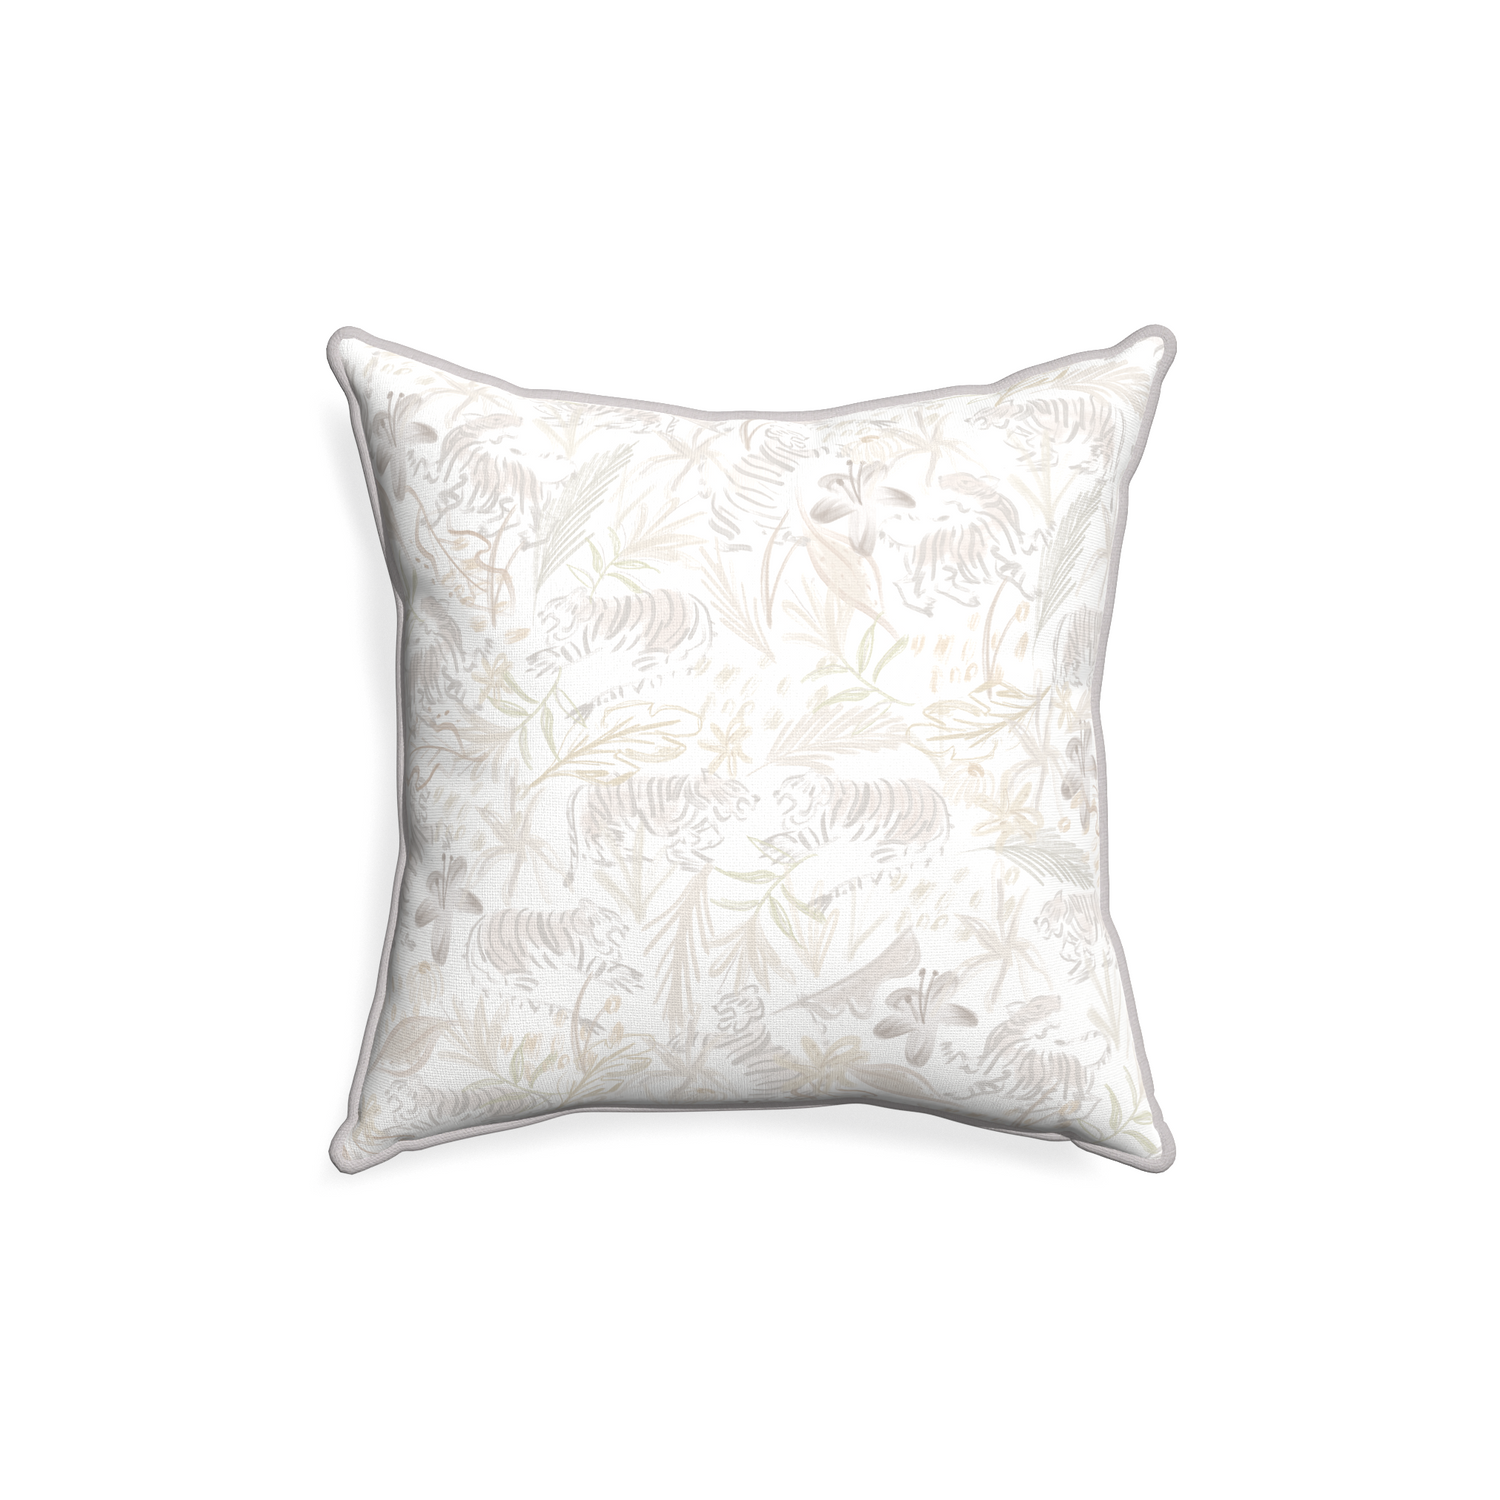 18-square frida sand custom beige chinoiserie tigerpillow with pebble piping on white background